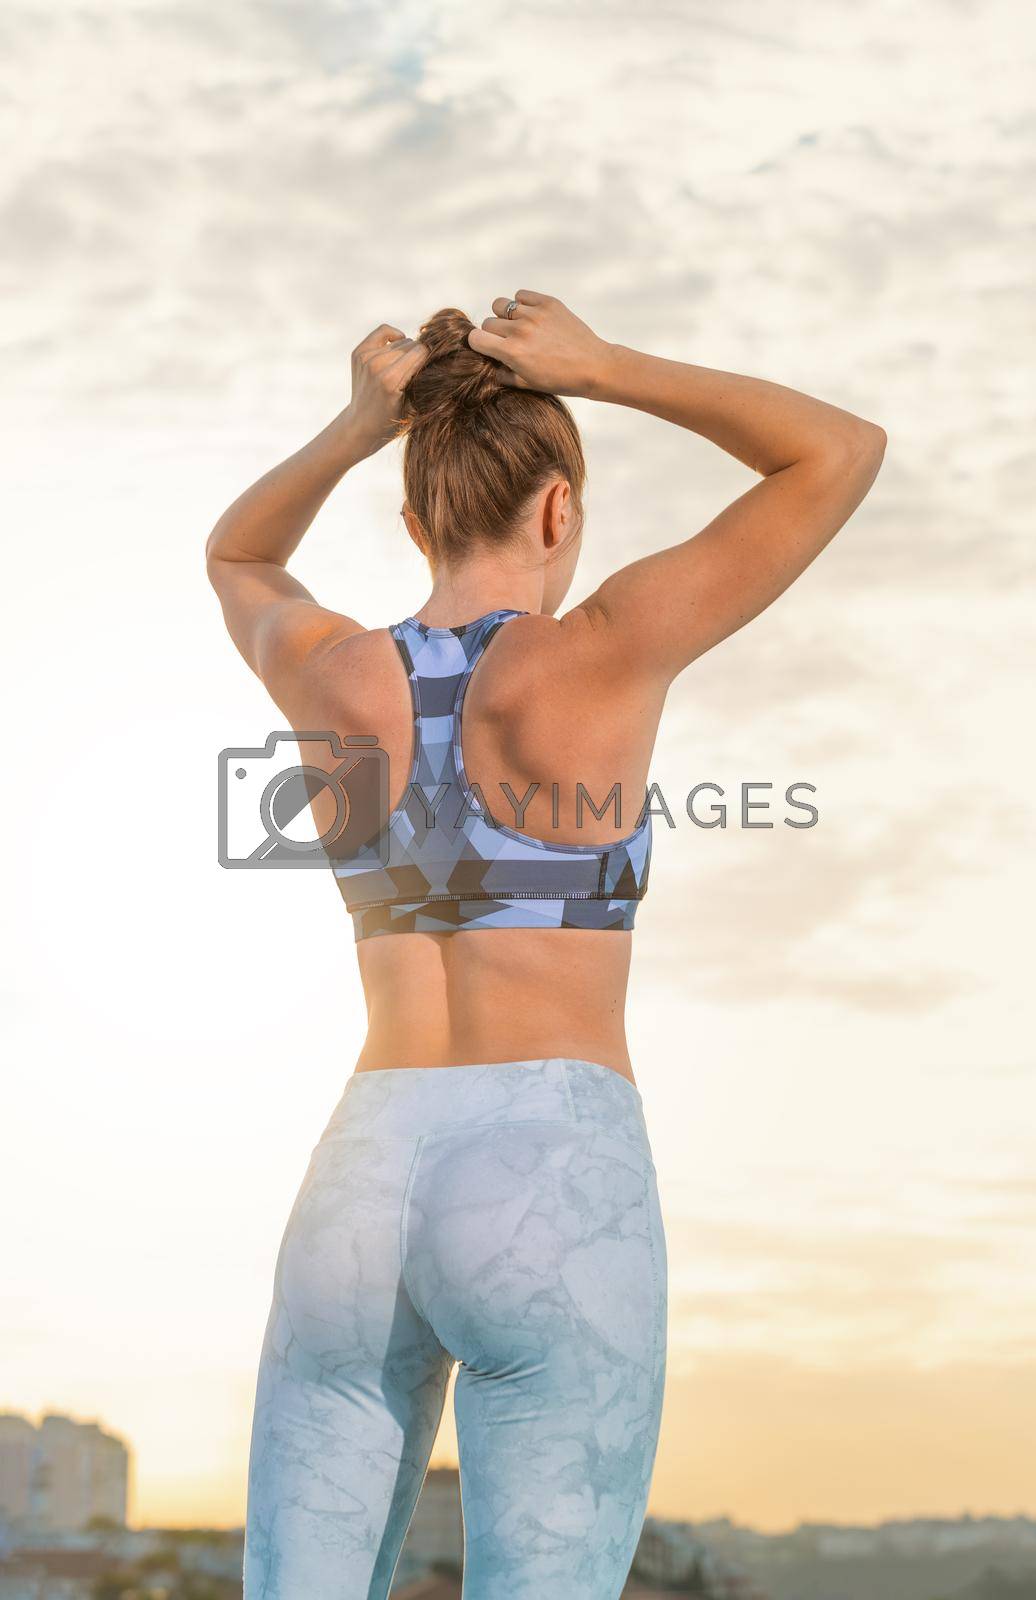 Royalty free image of Sporty woman with slim tanned body in sportswear posing on sky background. by MikeOrlov